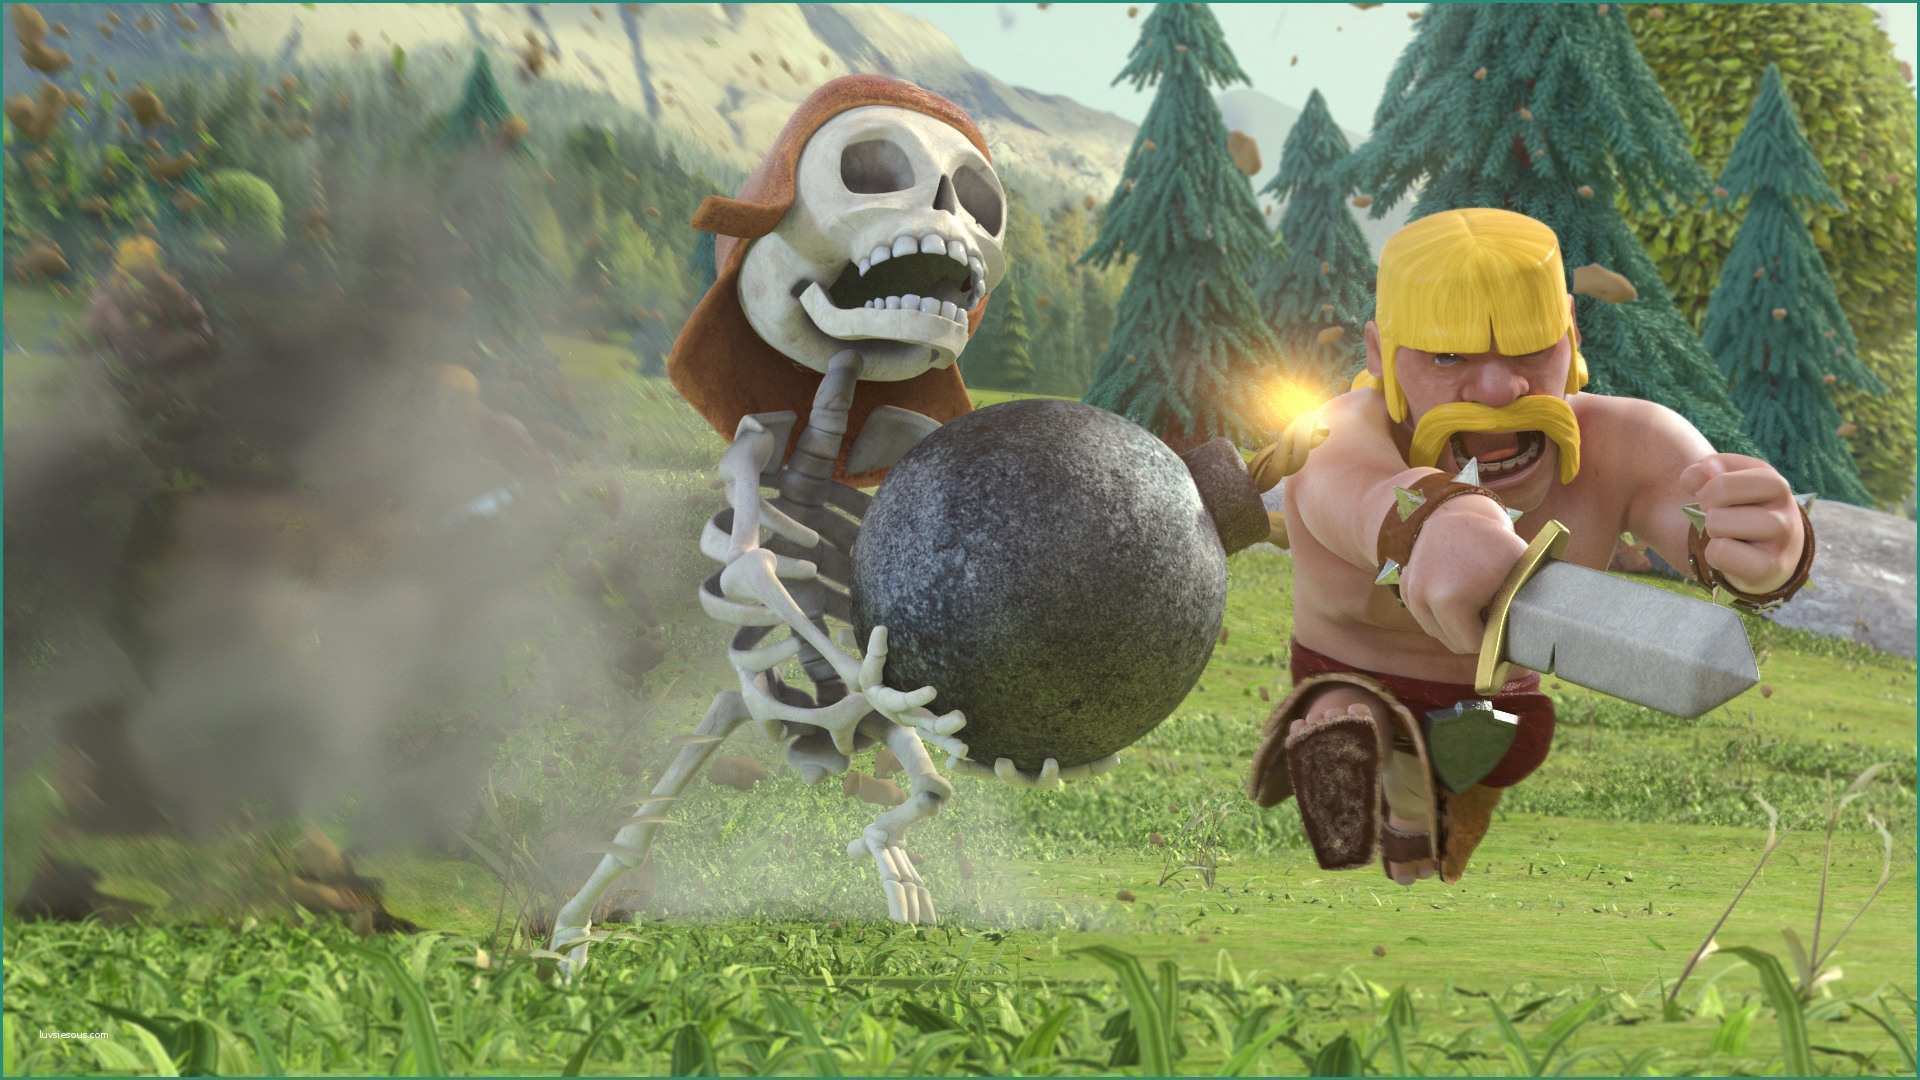 Sfondi Clash Of Clans Hd E which Clash Clans Troop are You